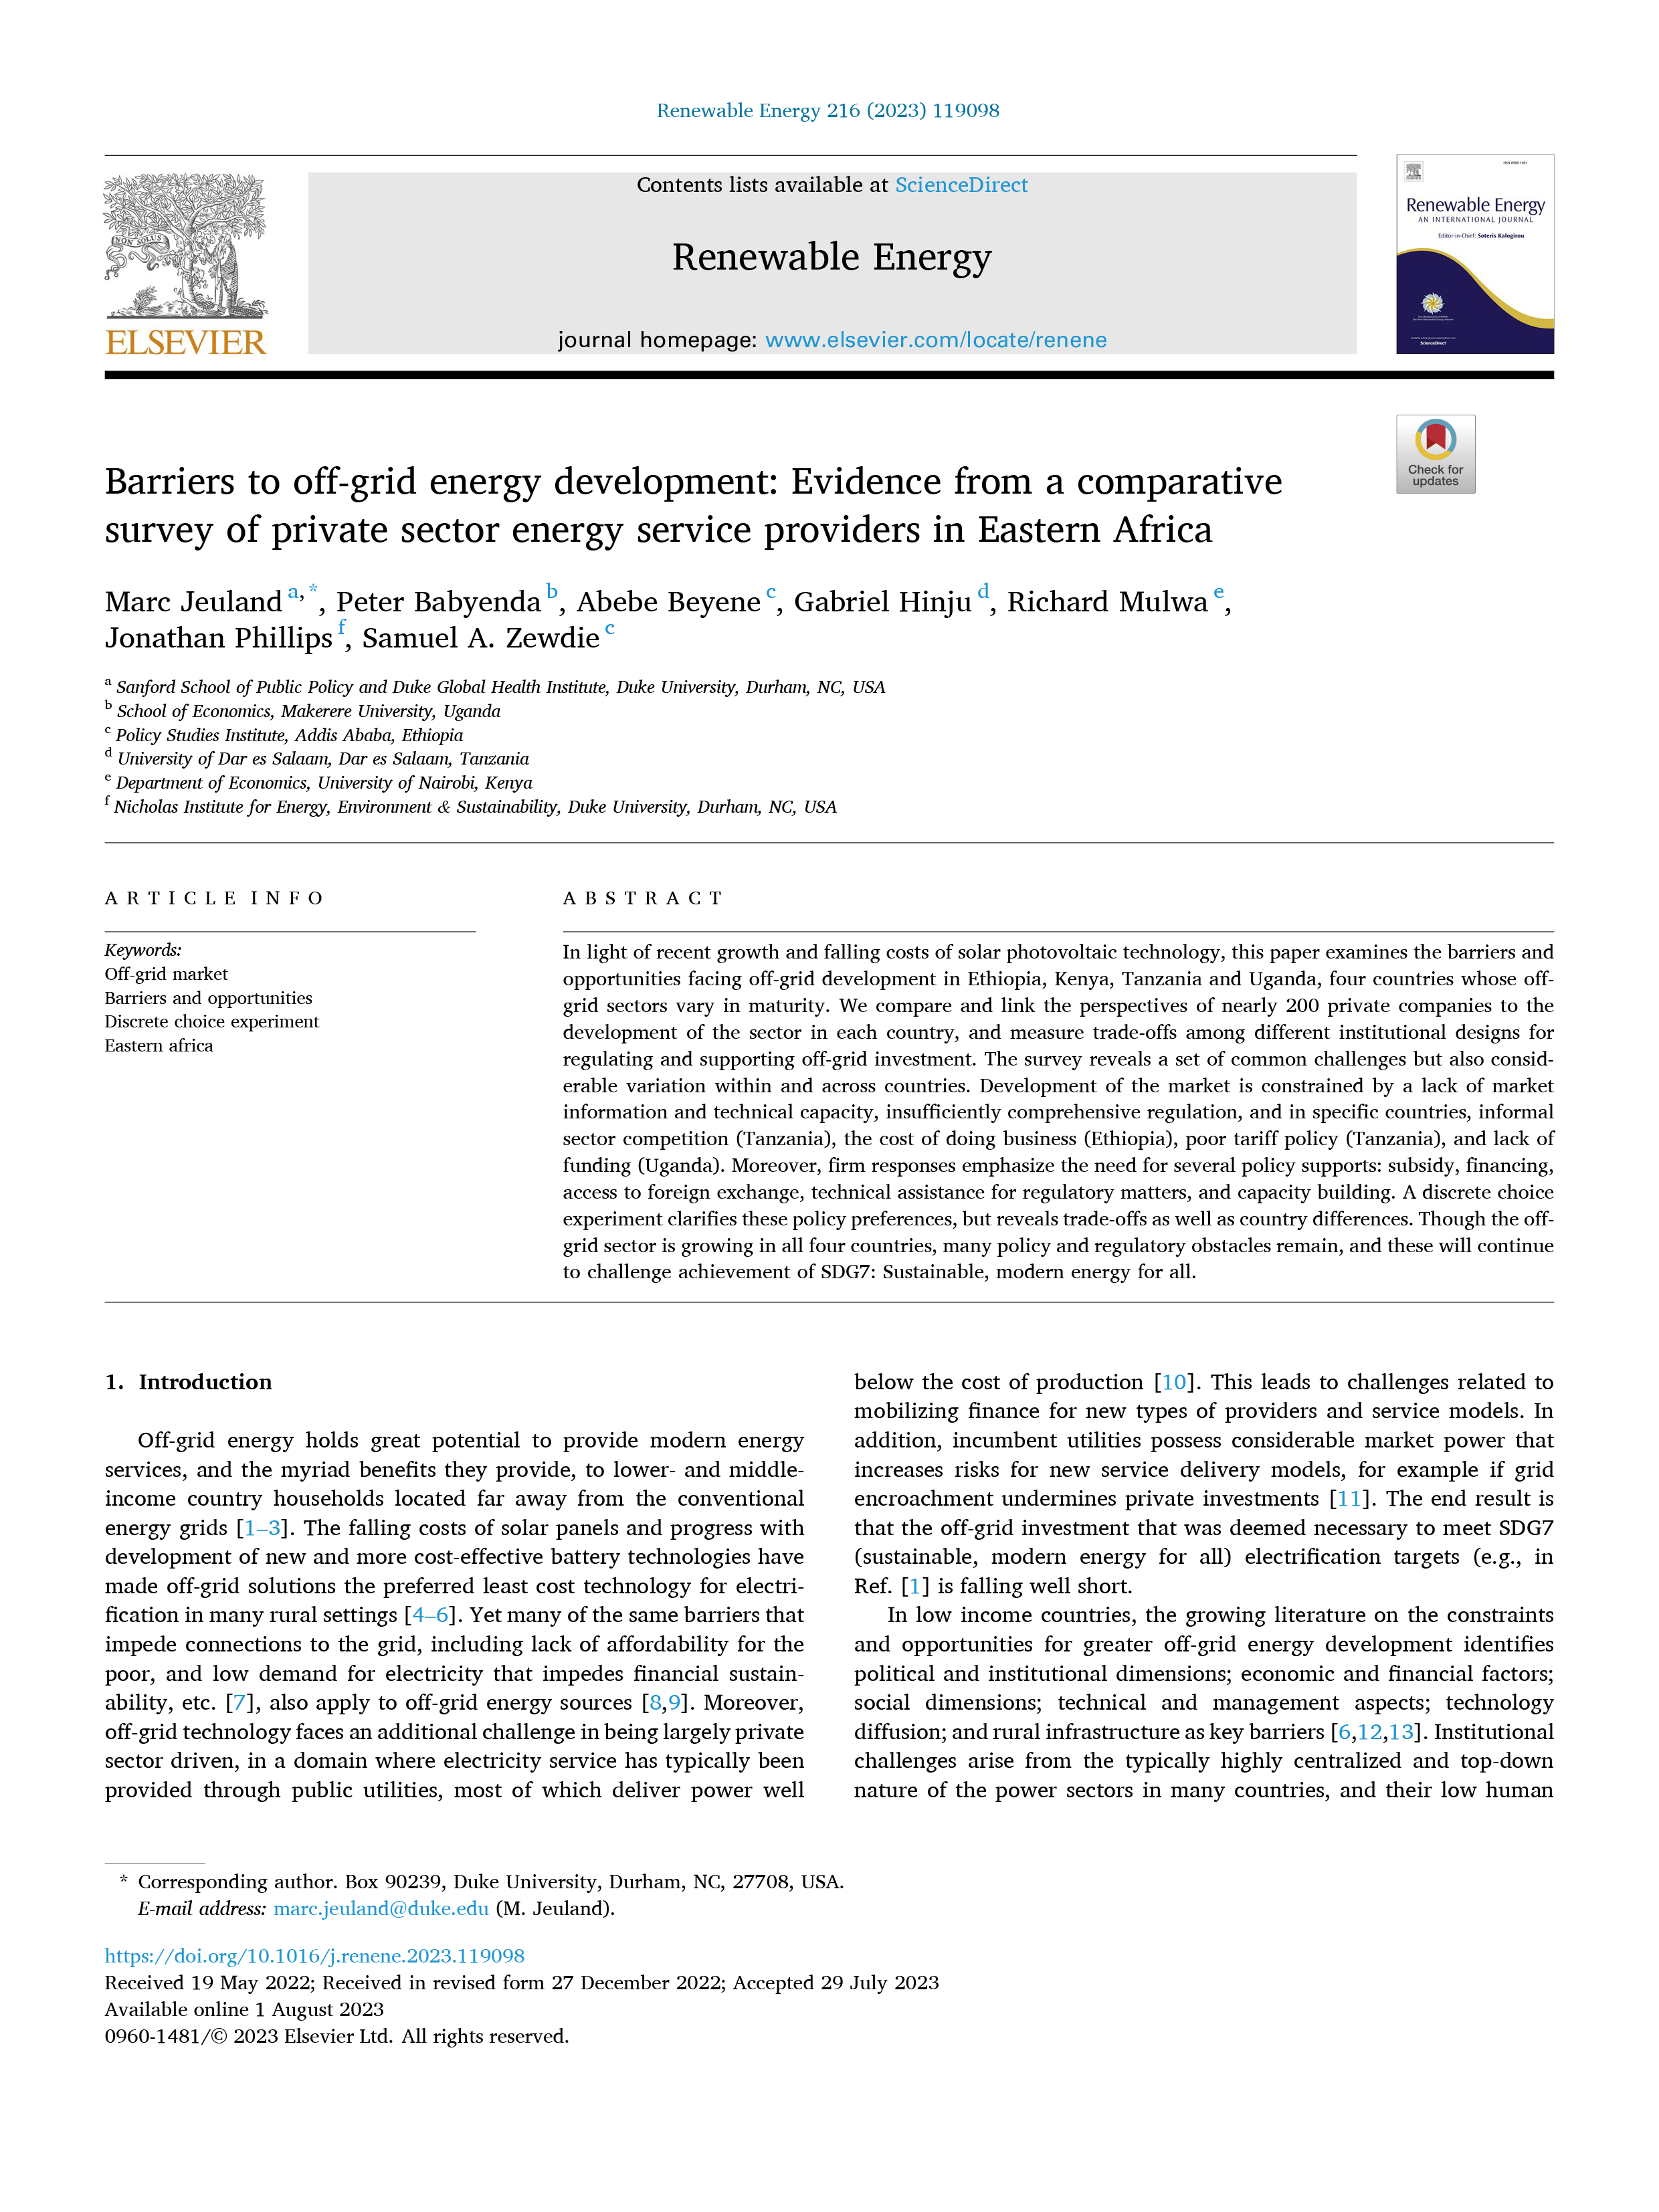 Barriers to Off-Grid Energy Development: Evidence from a Comparative Survey of Private Sector Energy Service Providers in Eastern Africa cover